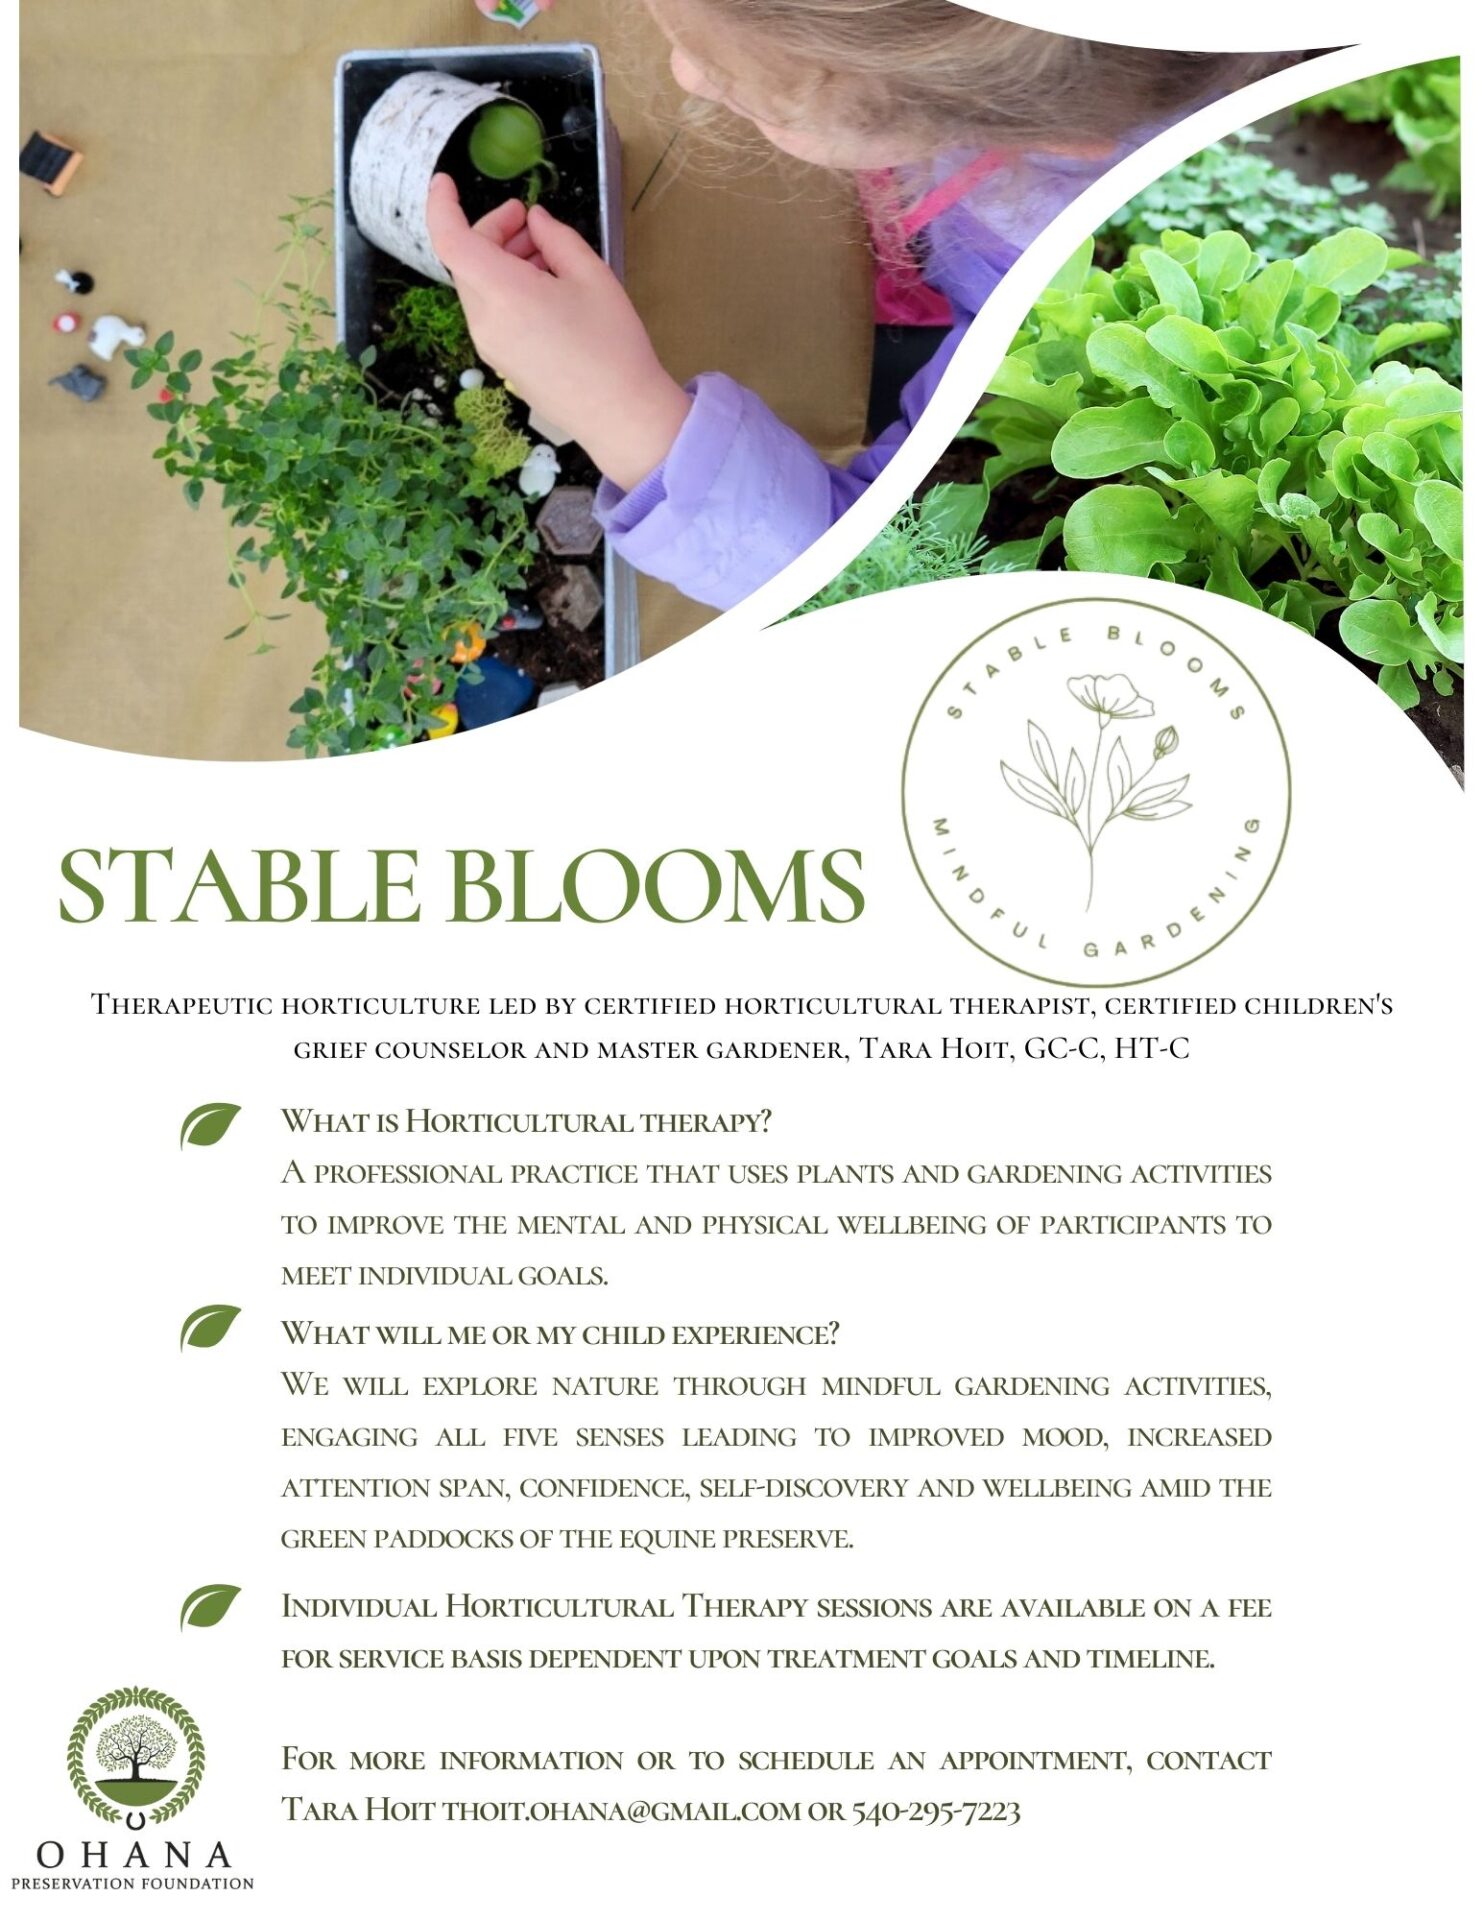 Stable Blooms Flyer (1)